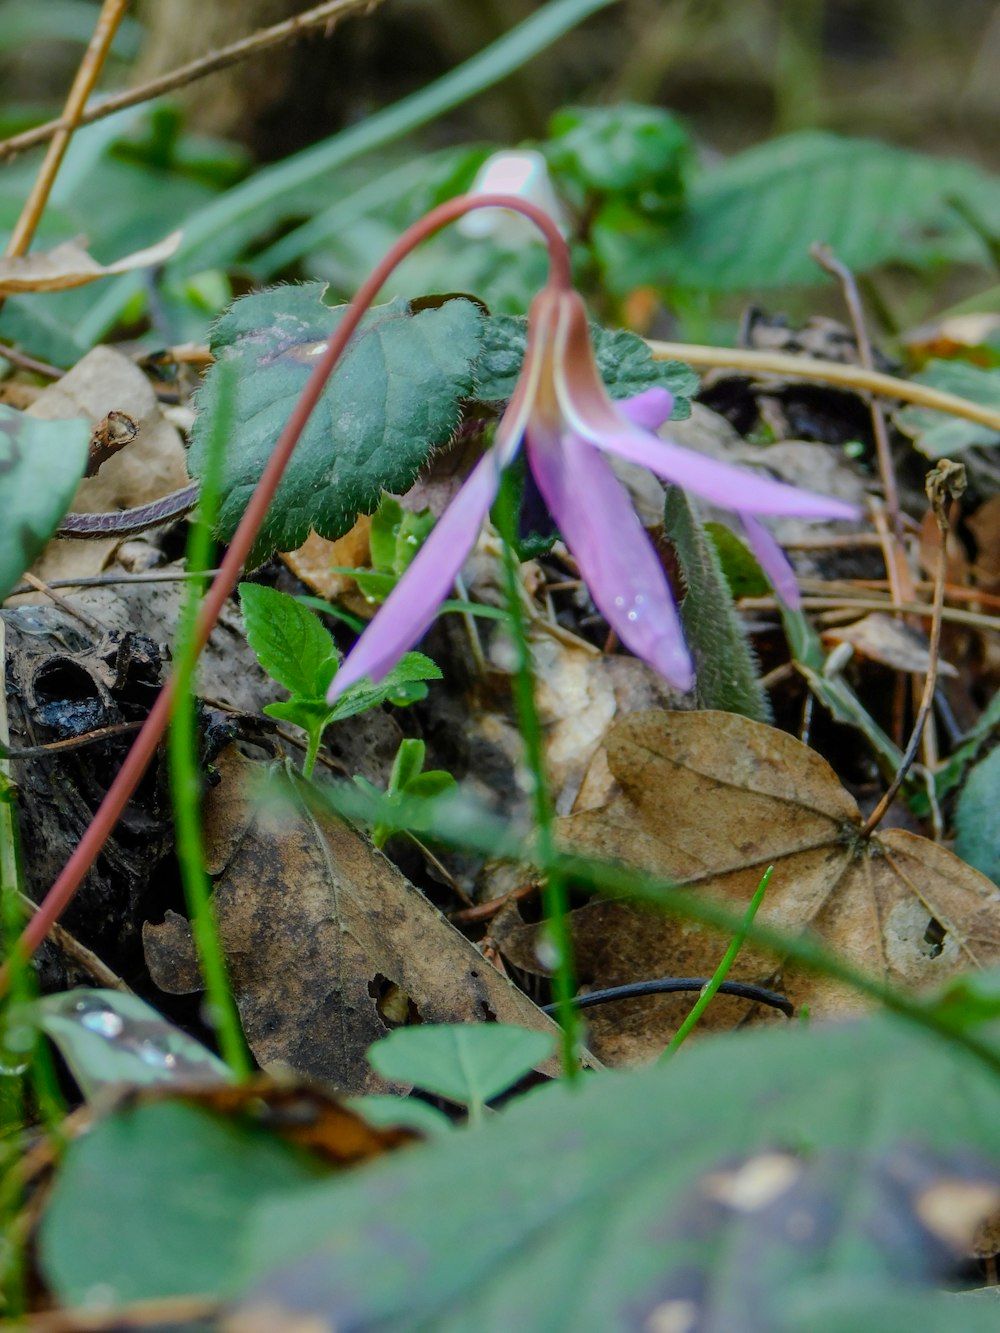 a purple flower sitting on top of a leaf covered ground